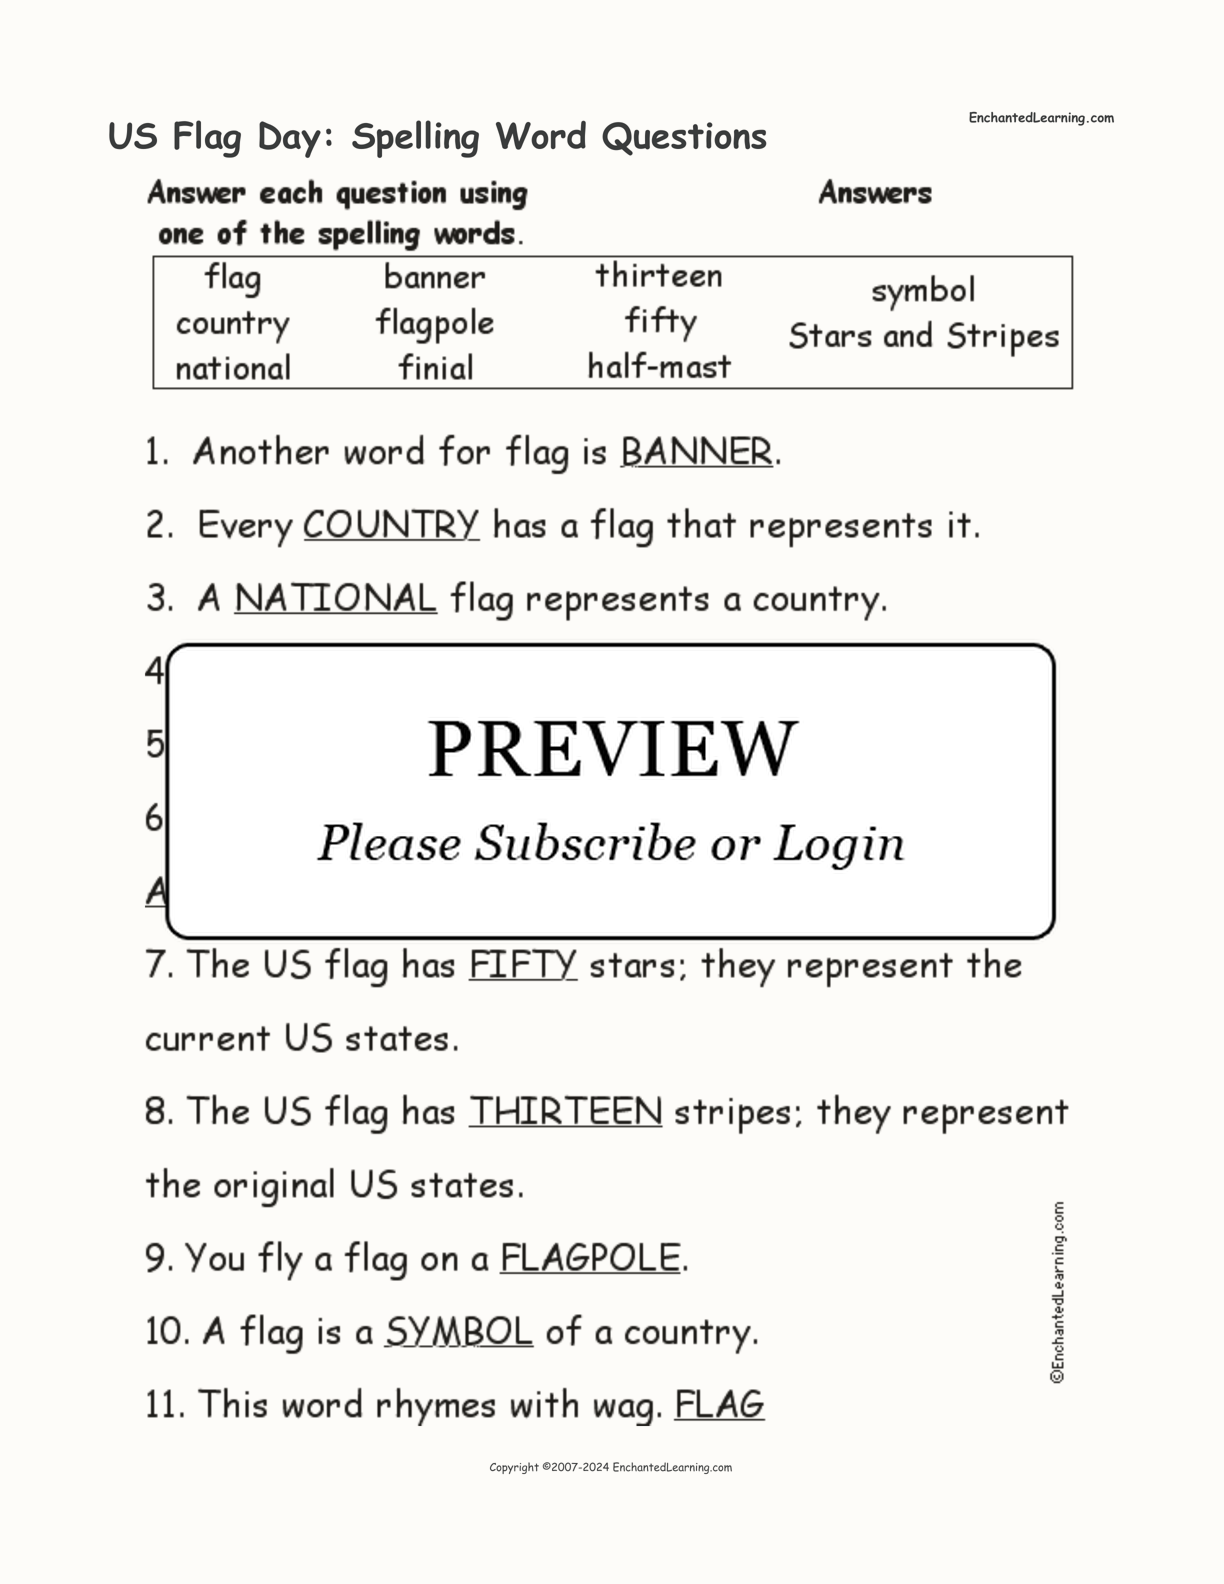 US Flag Day: Spelling Word Questions interactive worksheet page 2